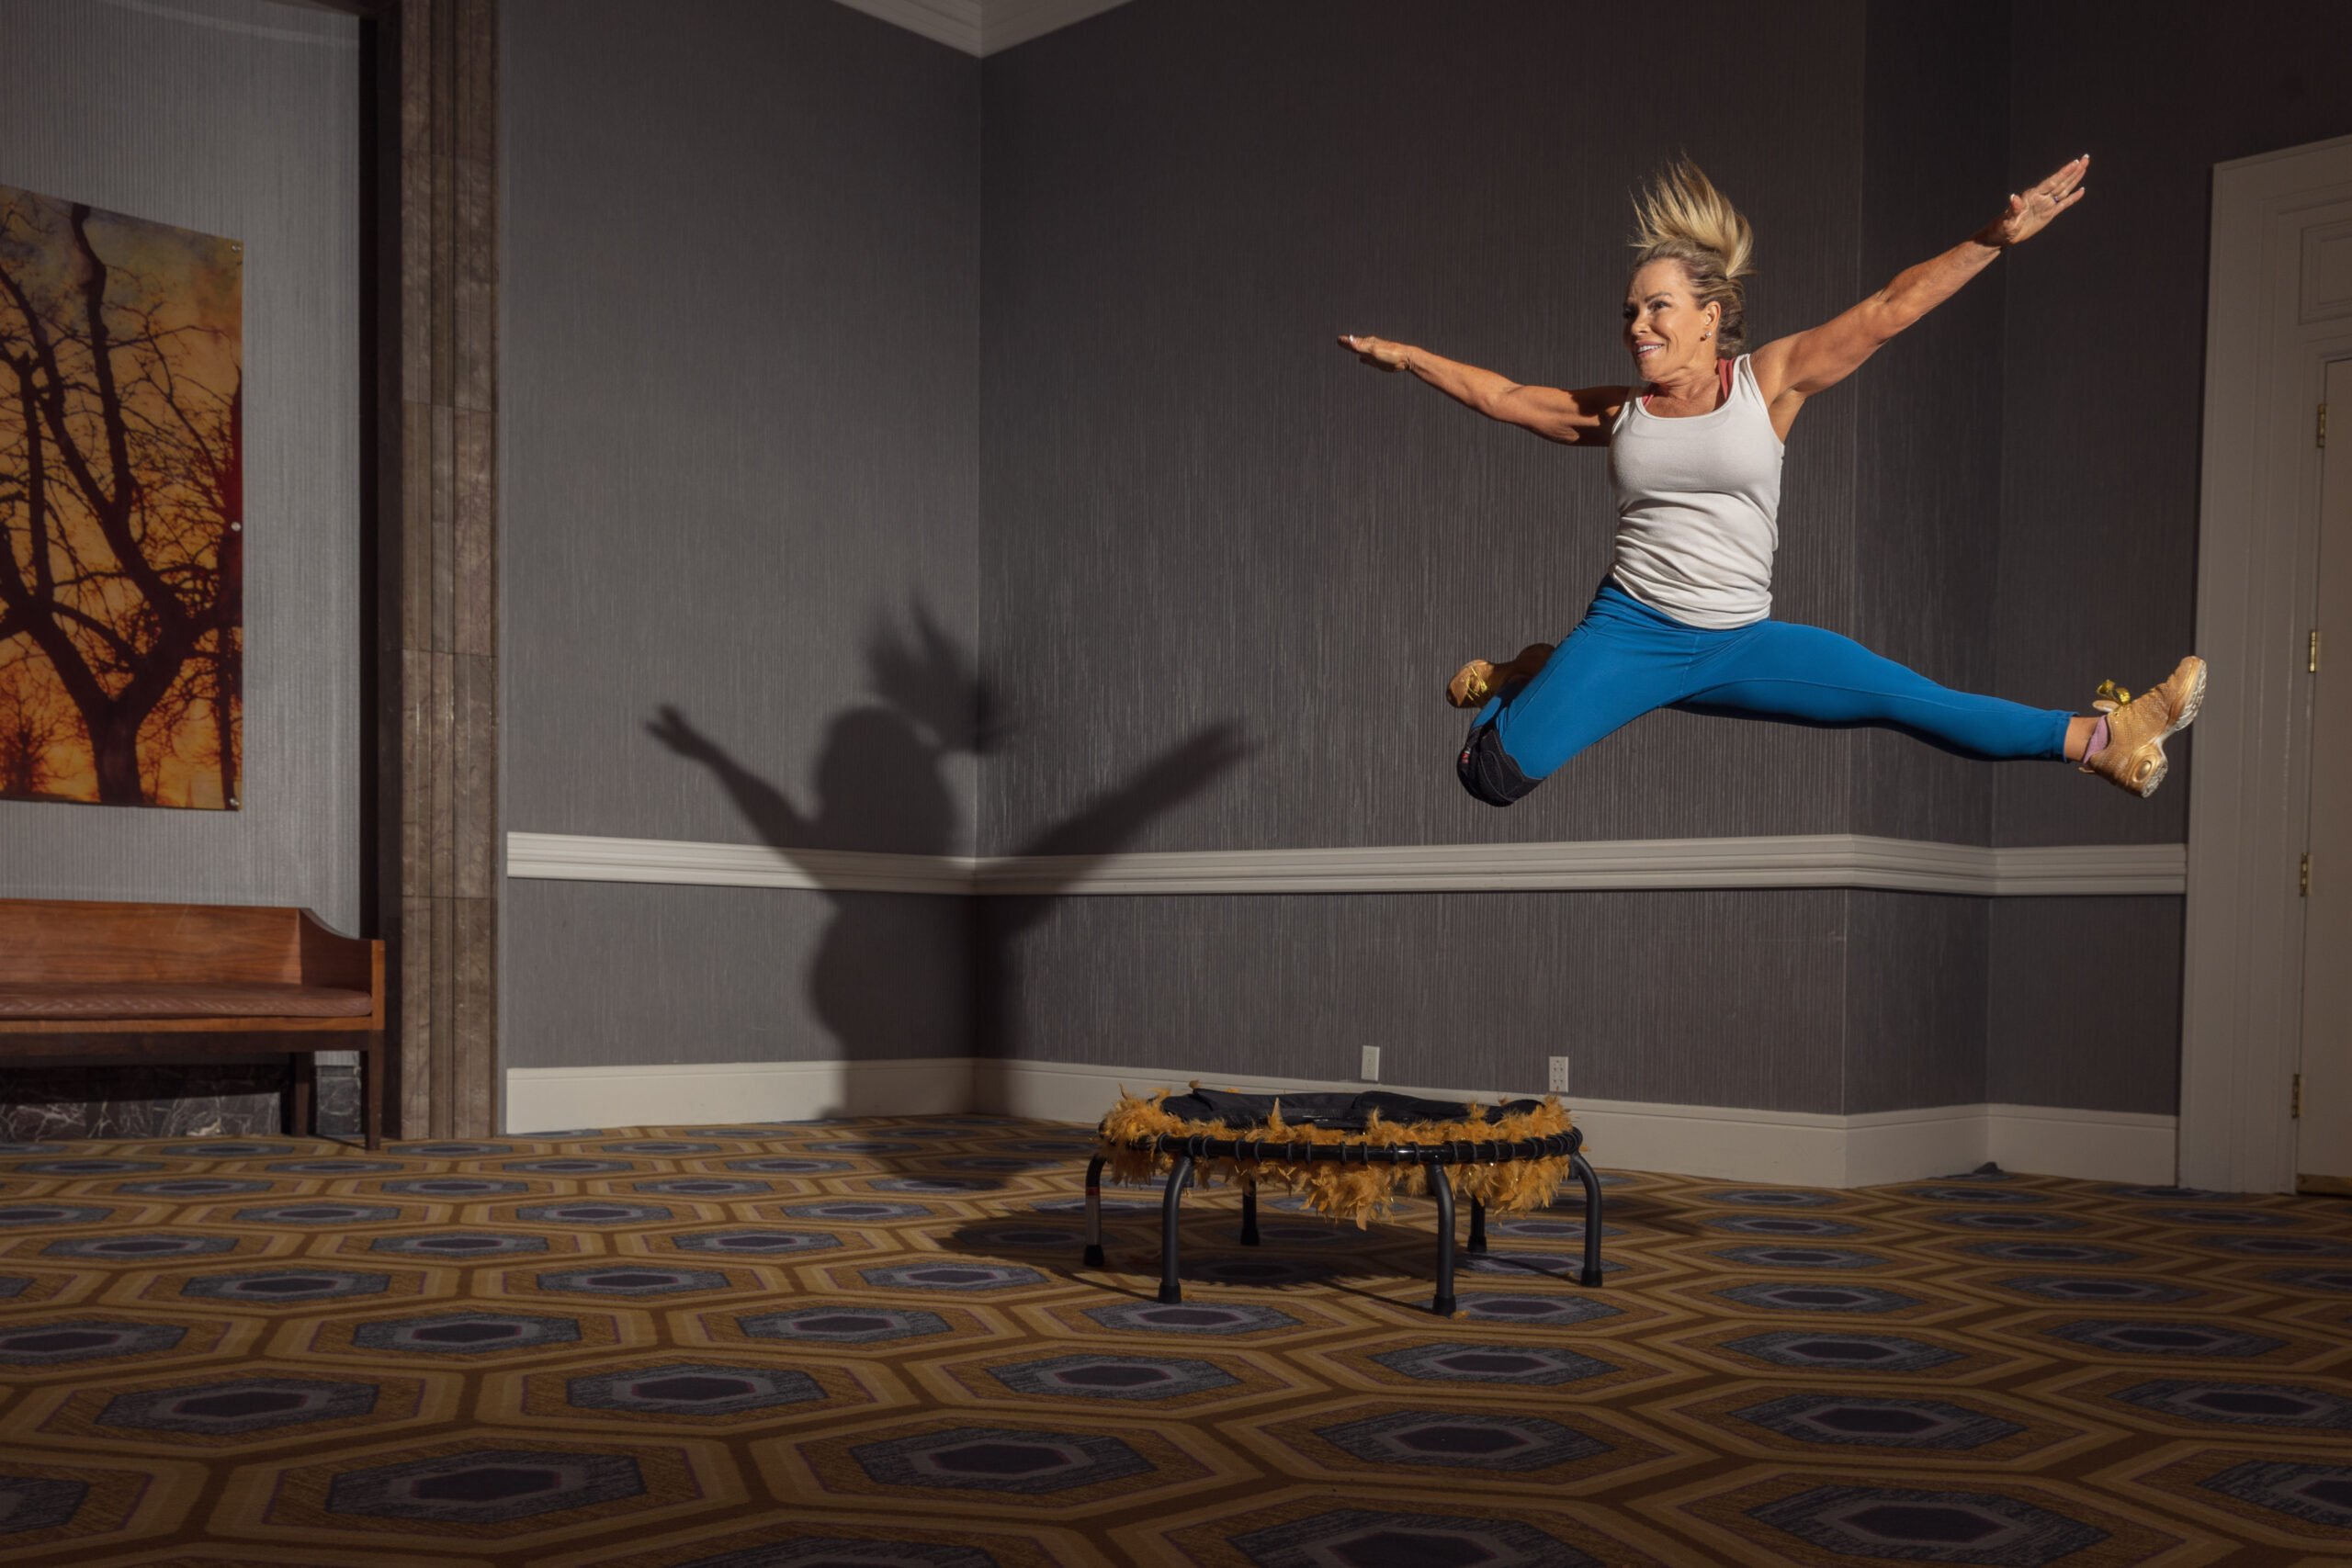 A blonde-haired older woman leaps with arms and legs extended from a trampoline, wearing simple workout gear. She's in a fancy looking hallway.